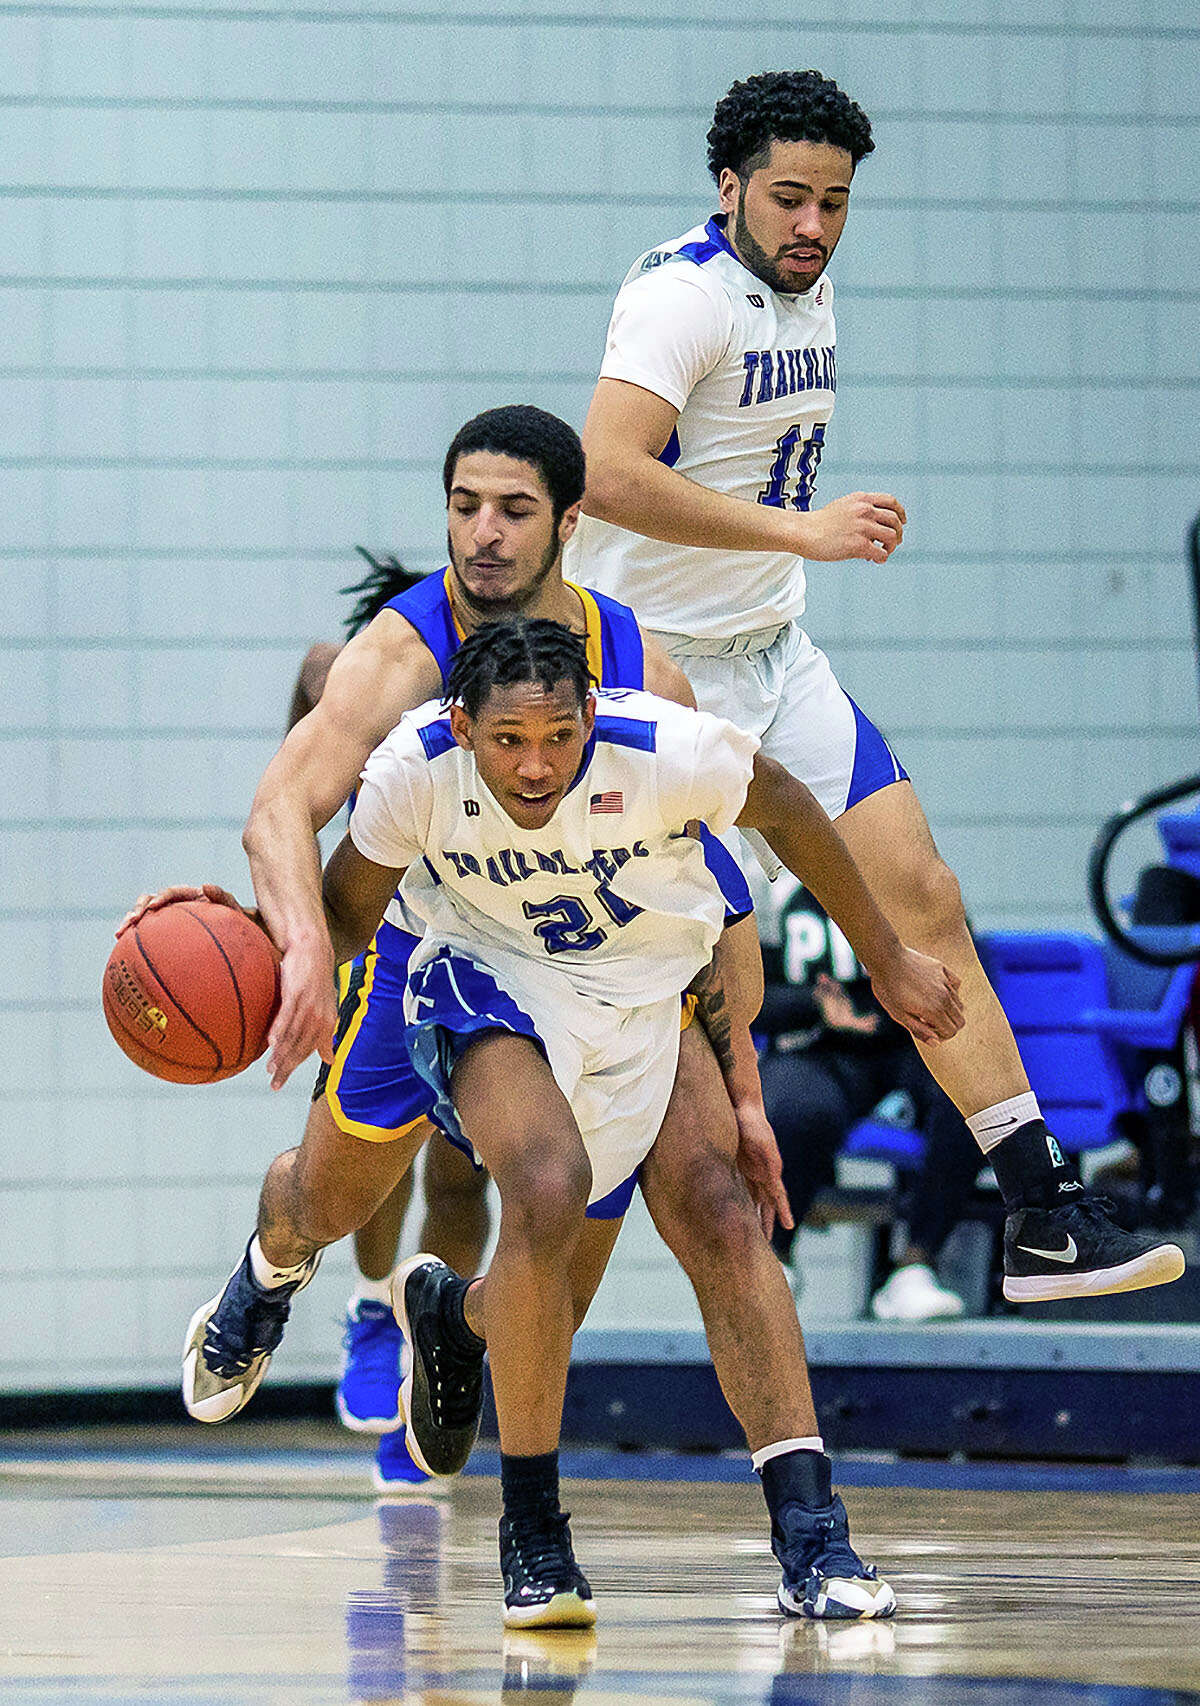 Brevin Jefferson of Vincennes University, middle, reaches in on LCCC's DeMarion Shanklin of LCCC (20) Monday night at the River Bend Arena. Behind them is LCCC's Zidane Moore.